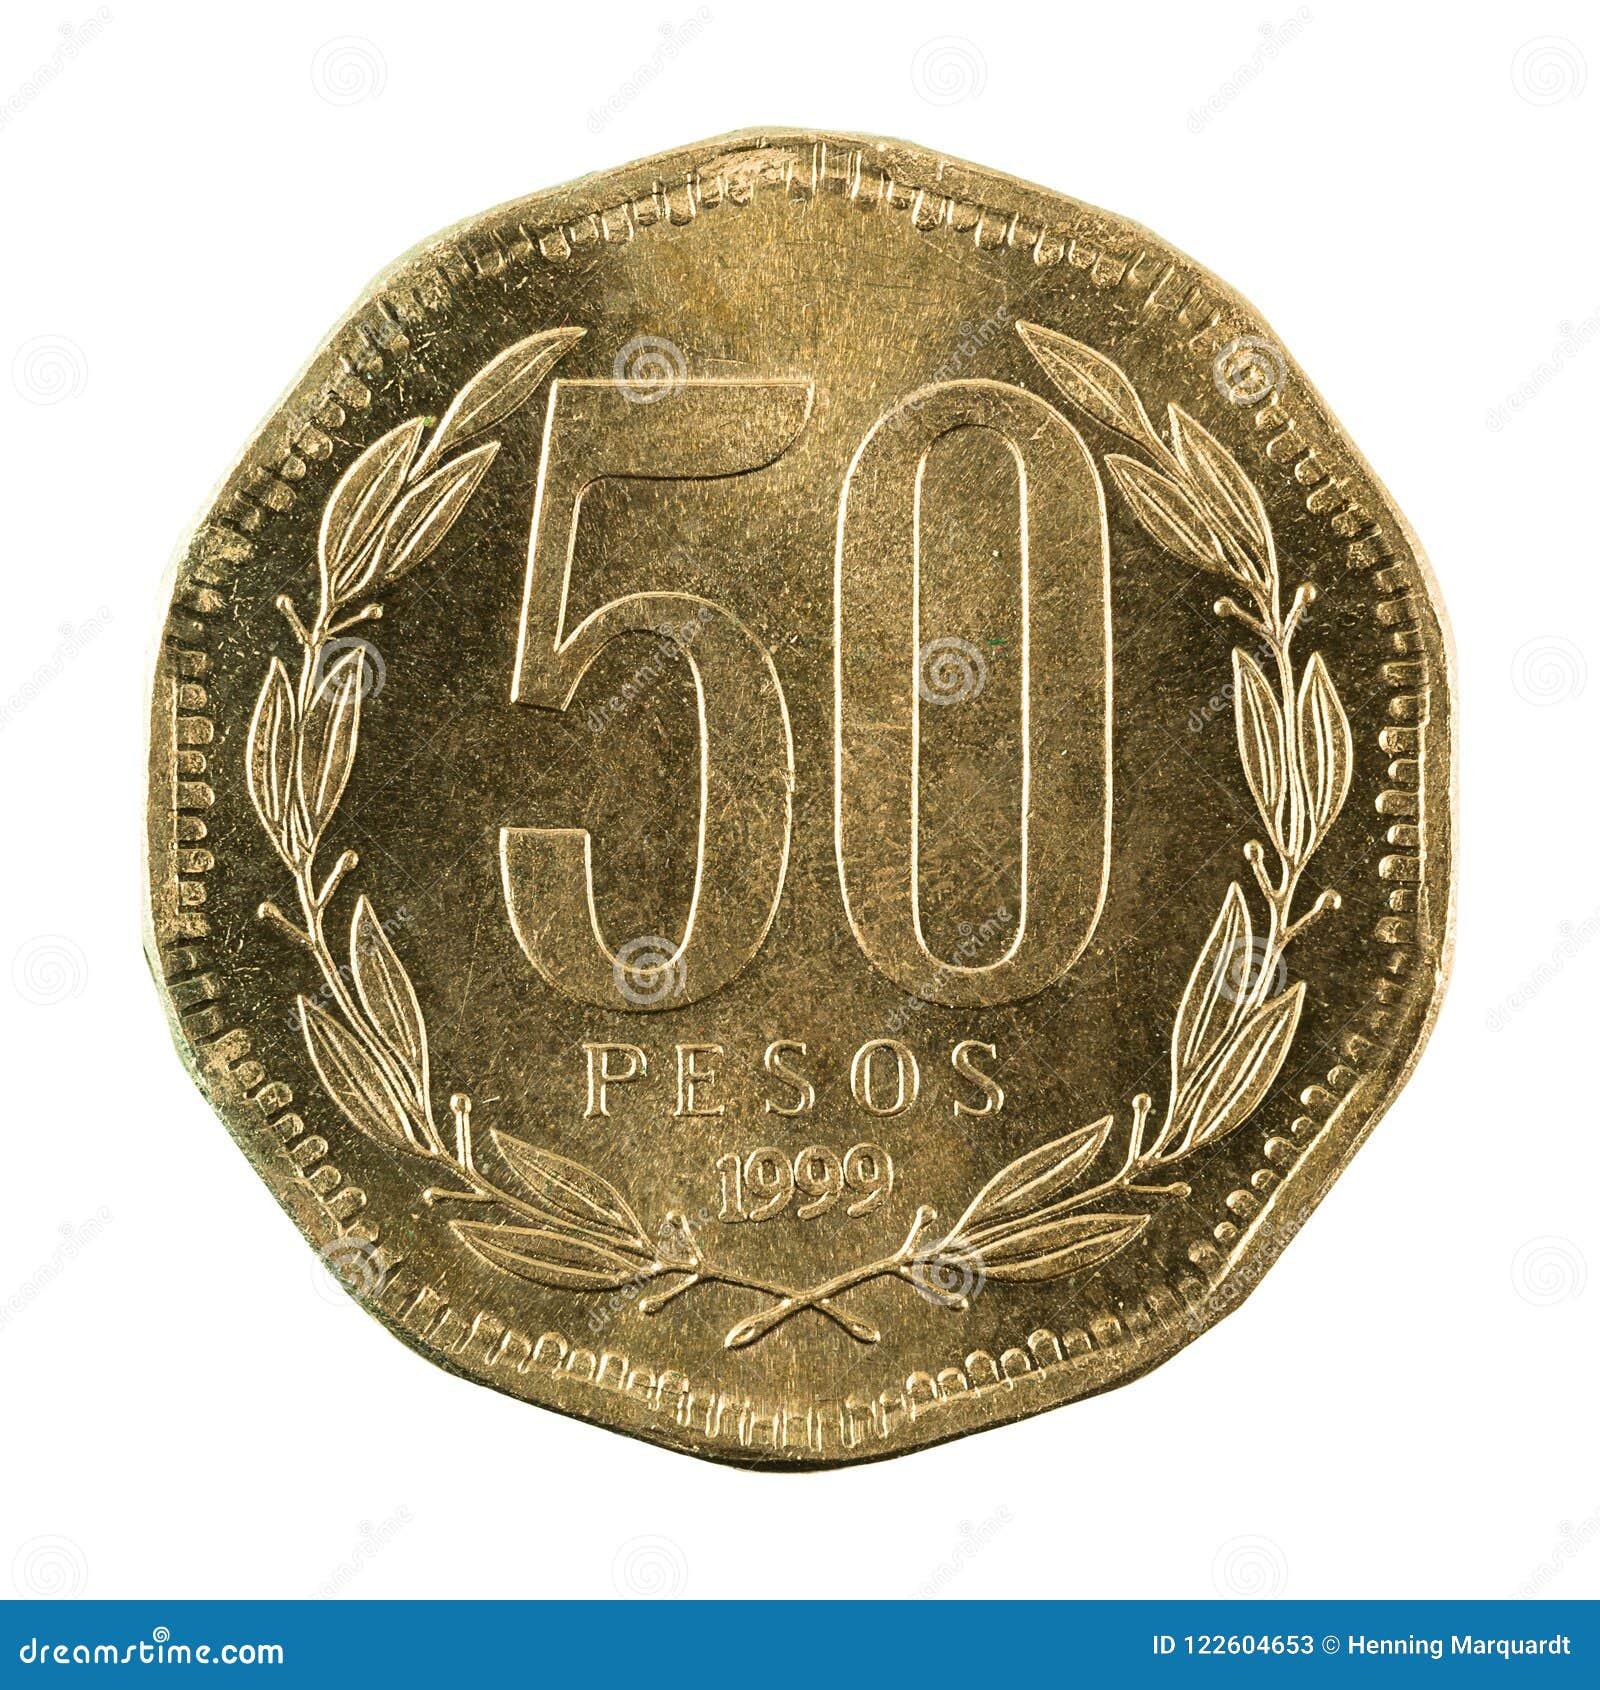 50 Chilean Peso Coin 1999 Obverse Stock Image - Image of image, chilean ...